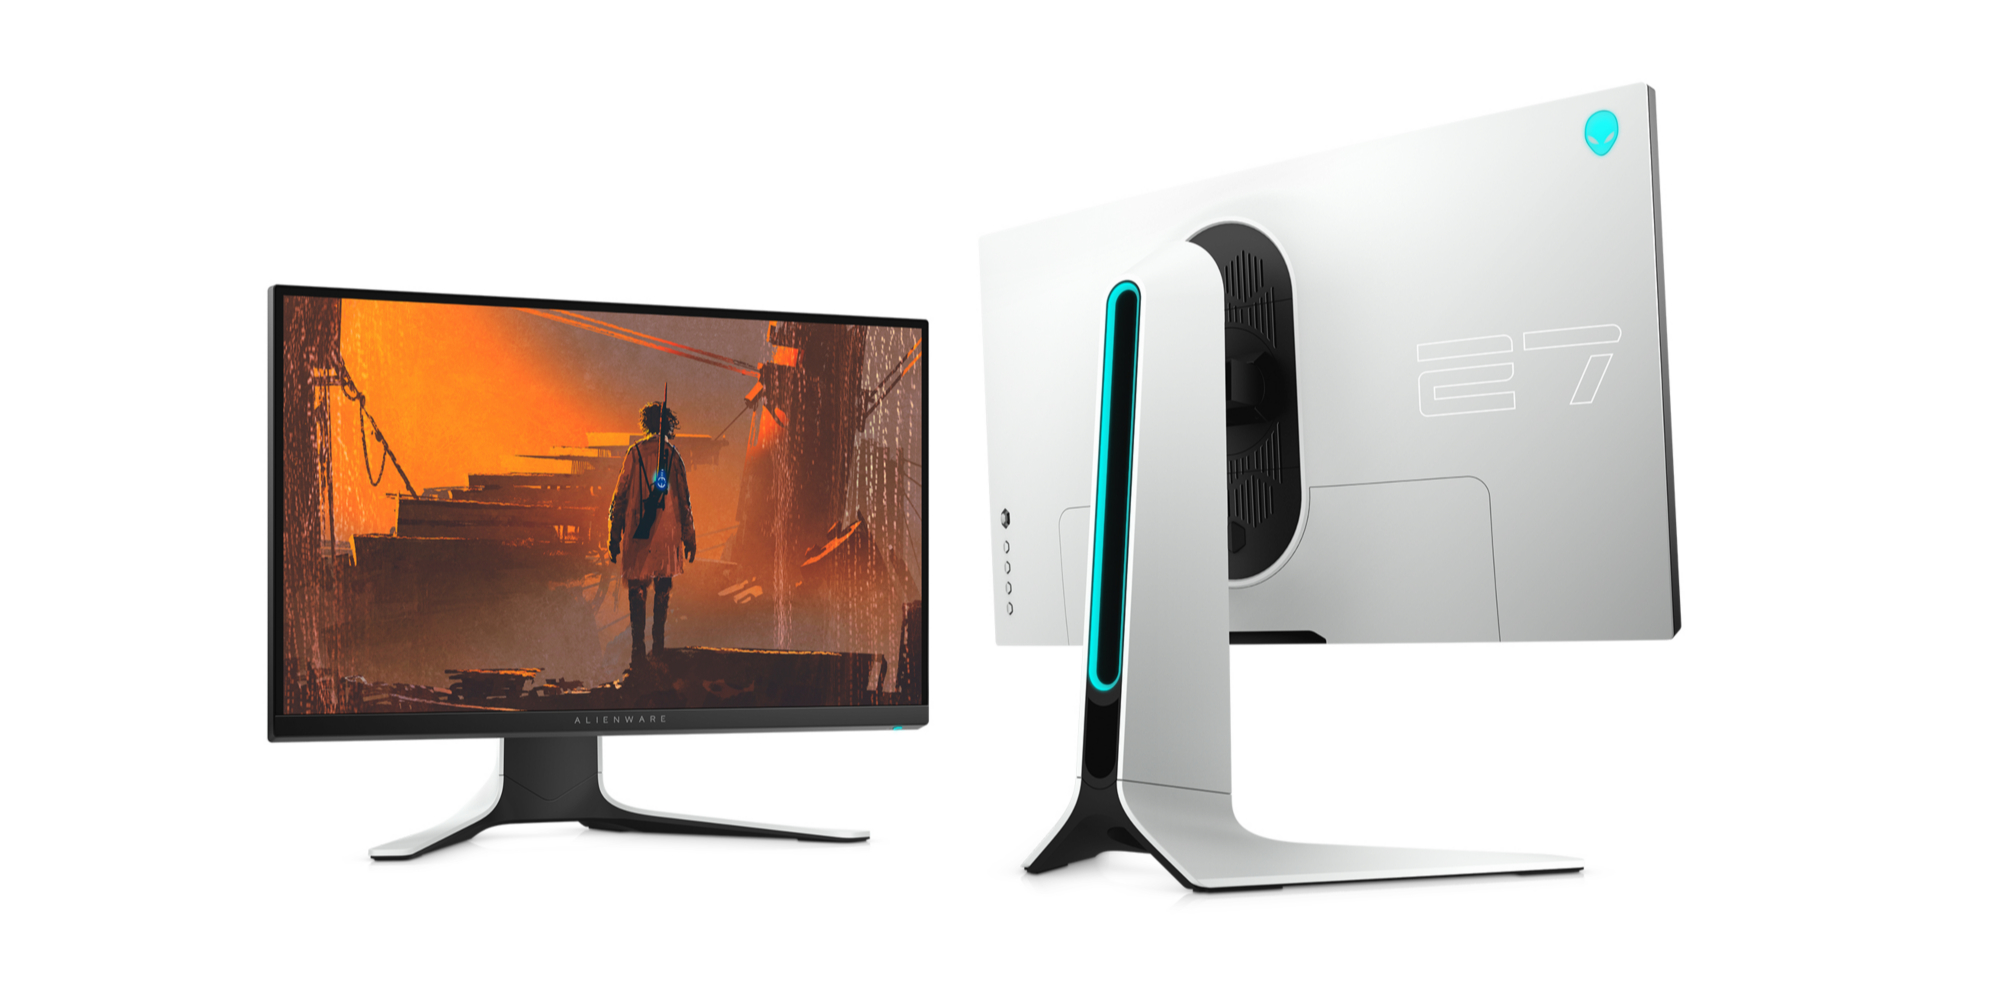 Alienware's 27inch 240Hz Monitor looks great all around at 350 (Save